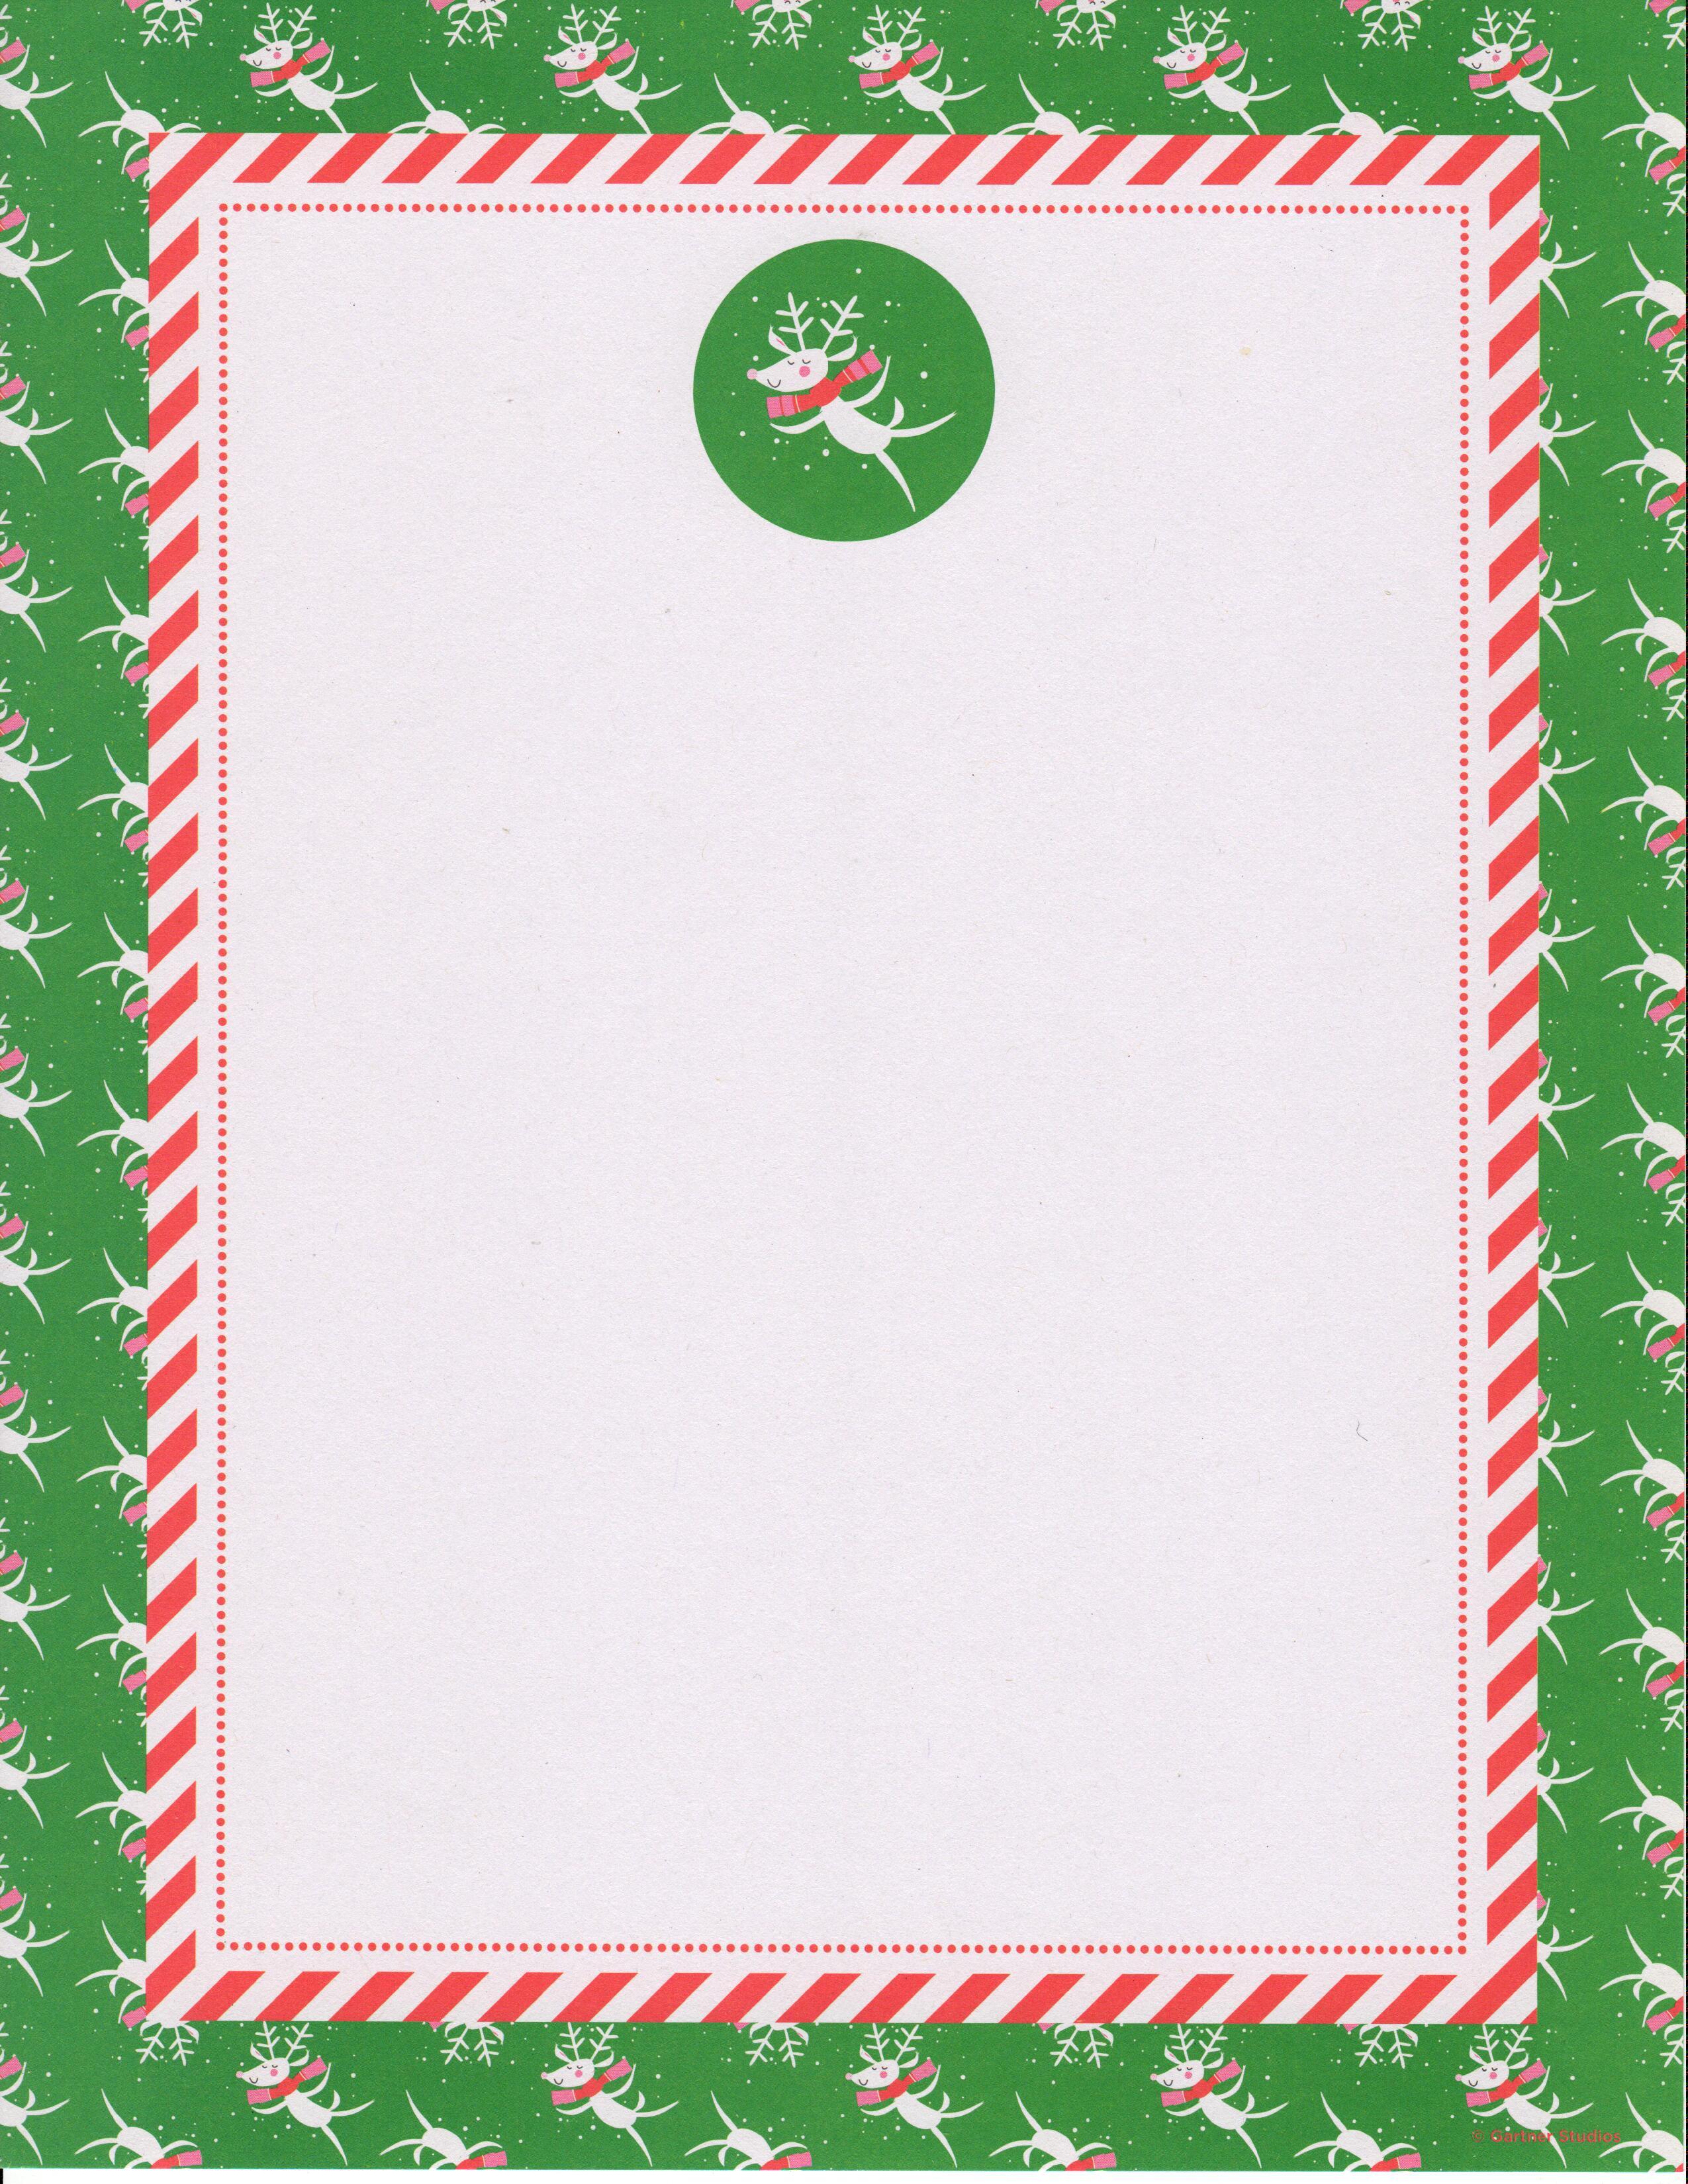 Whimsy Reindeer with Green Border - 25 Count